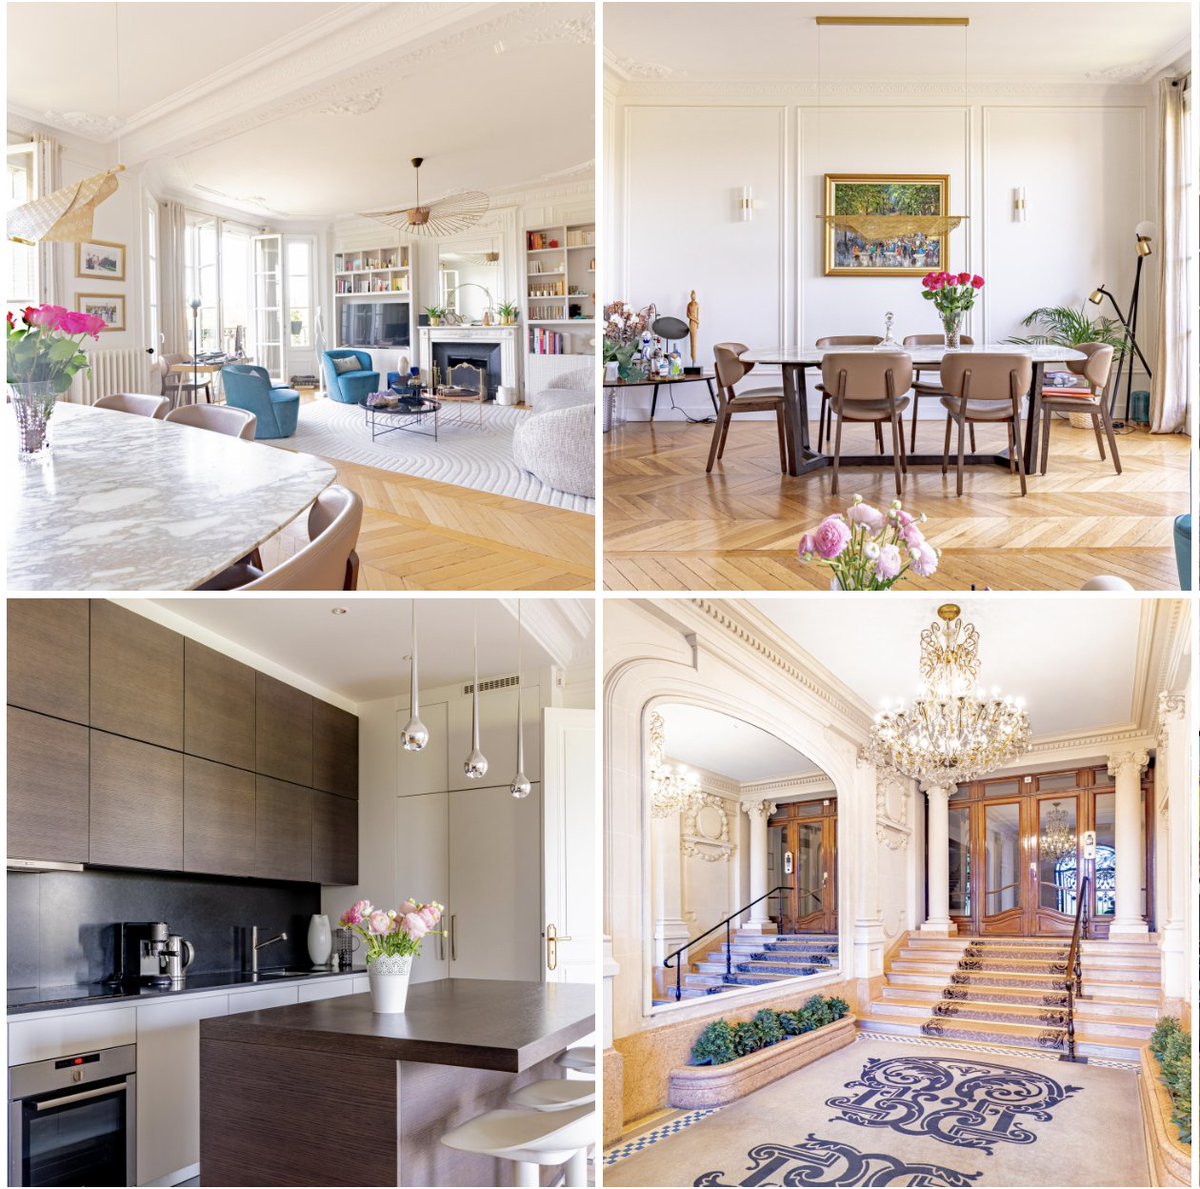 Exclusive mandate - Suffren #Paris7137.18 sqm renovated #apartment4 bedrooms - Lots of natural light - Quiet environment - Unobstructed #view Located on the 4th floor with elevator. This renovated apartment is the ideal family home. en.deluxe-confidential.com/vente-appartem………… #architecture